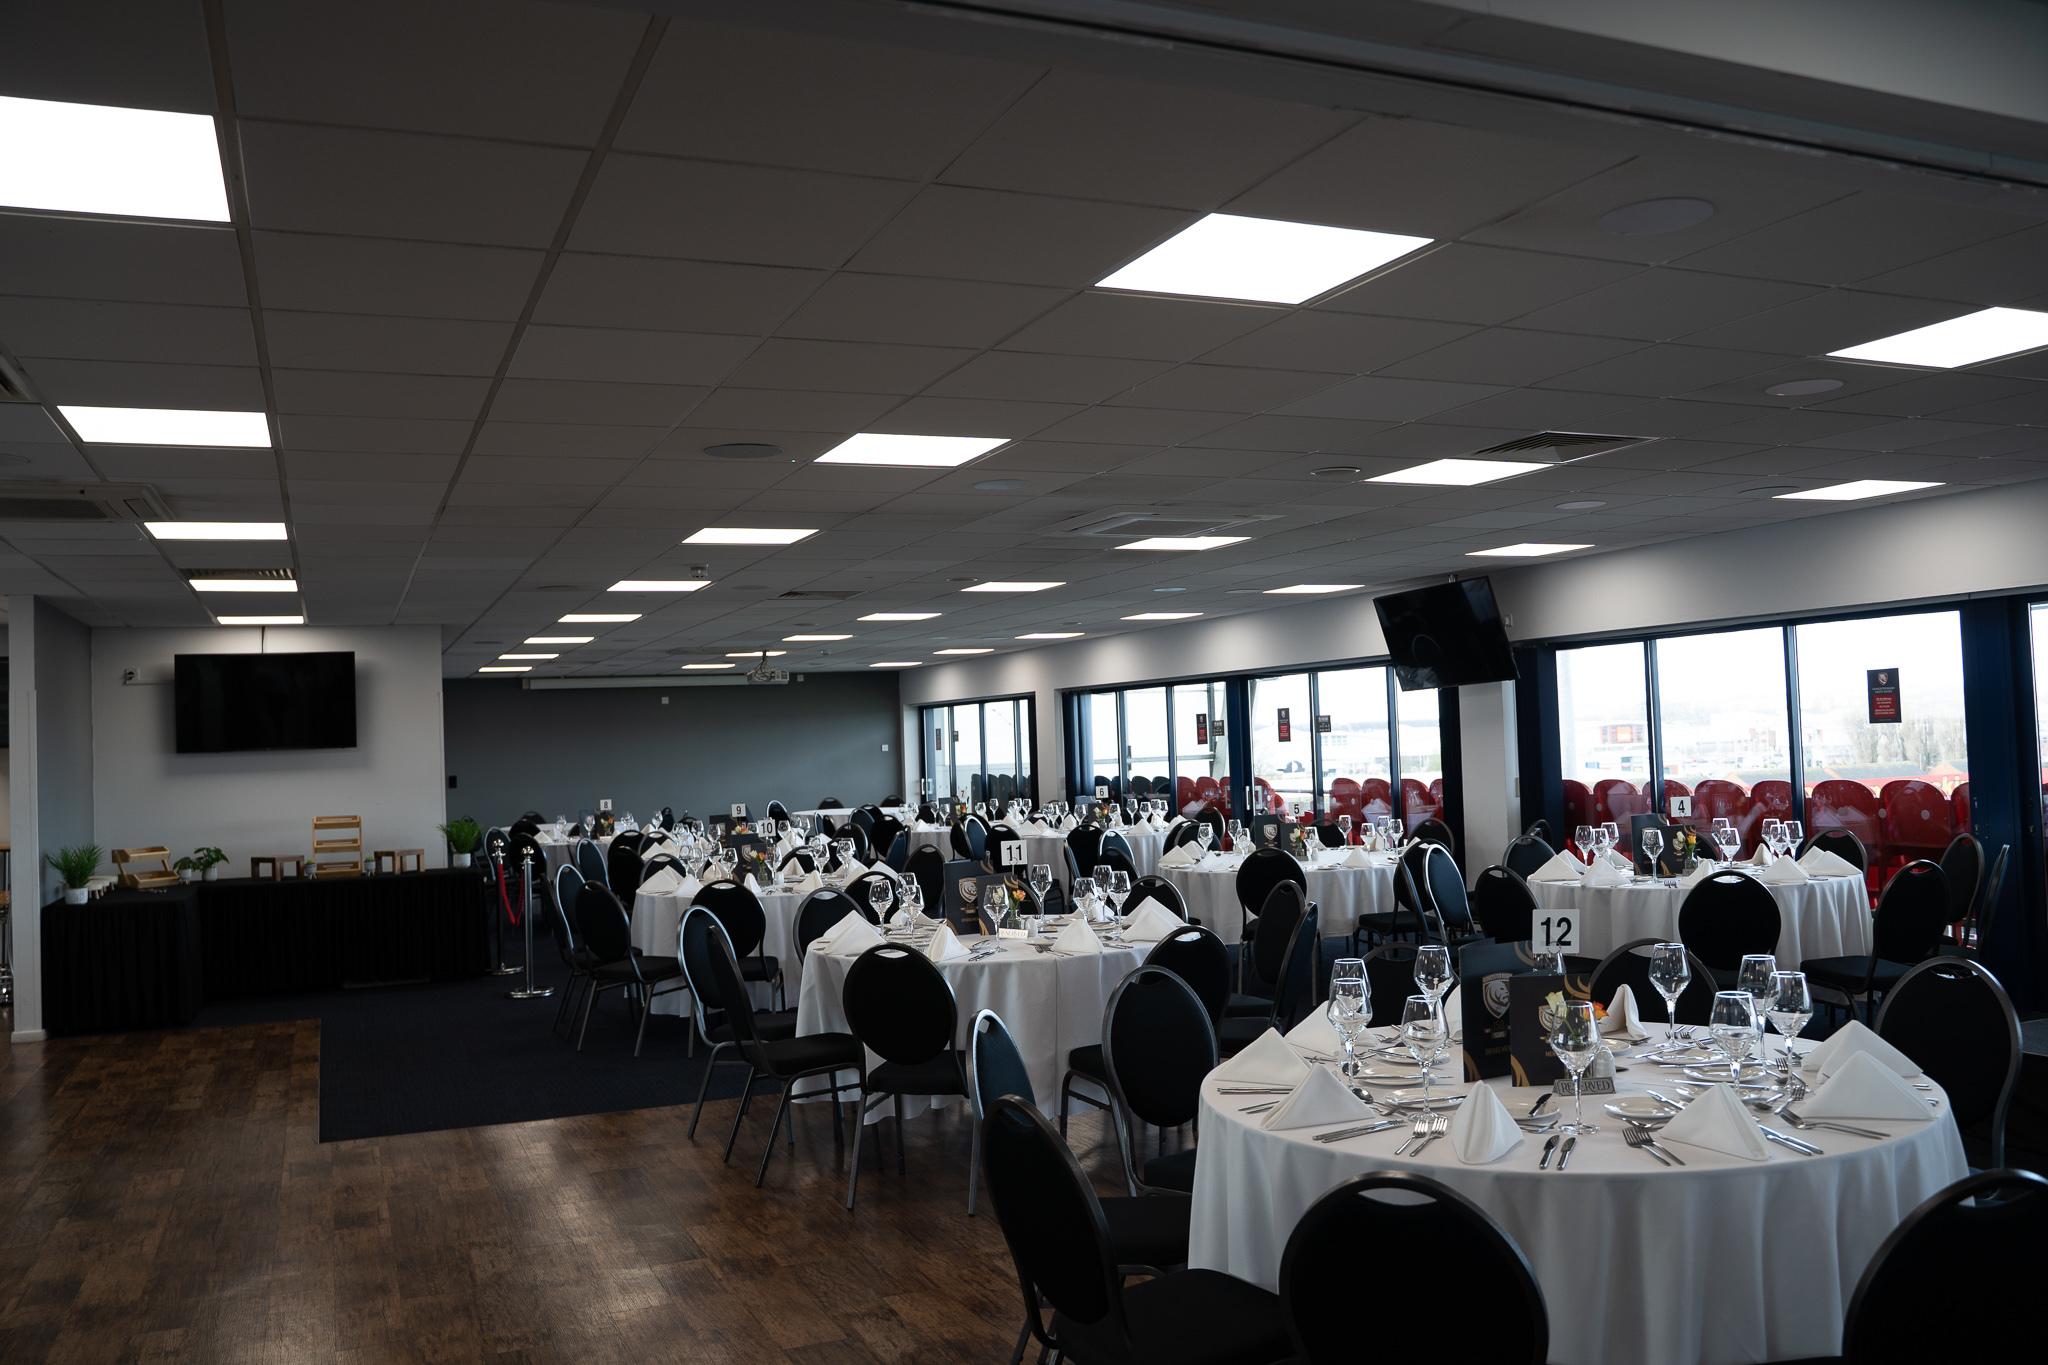 Captains Lounge, Gloucester Rugby Club: Kingsholm Stadium photo #1